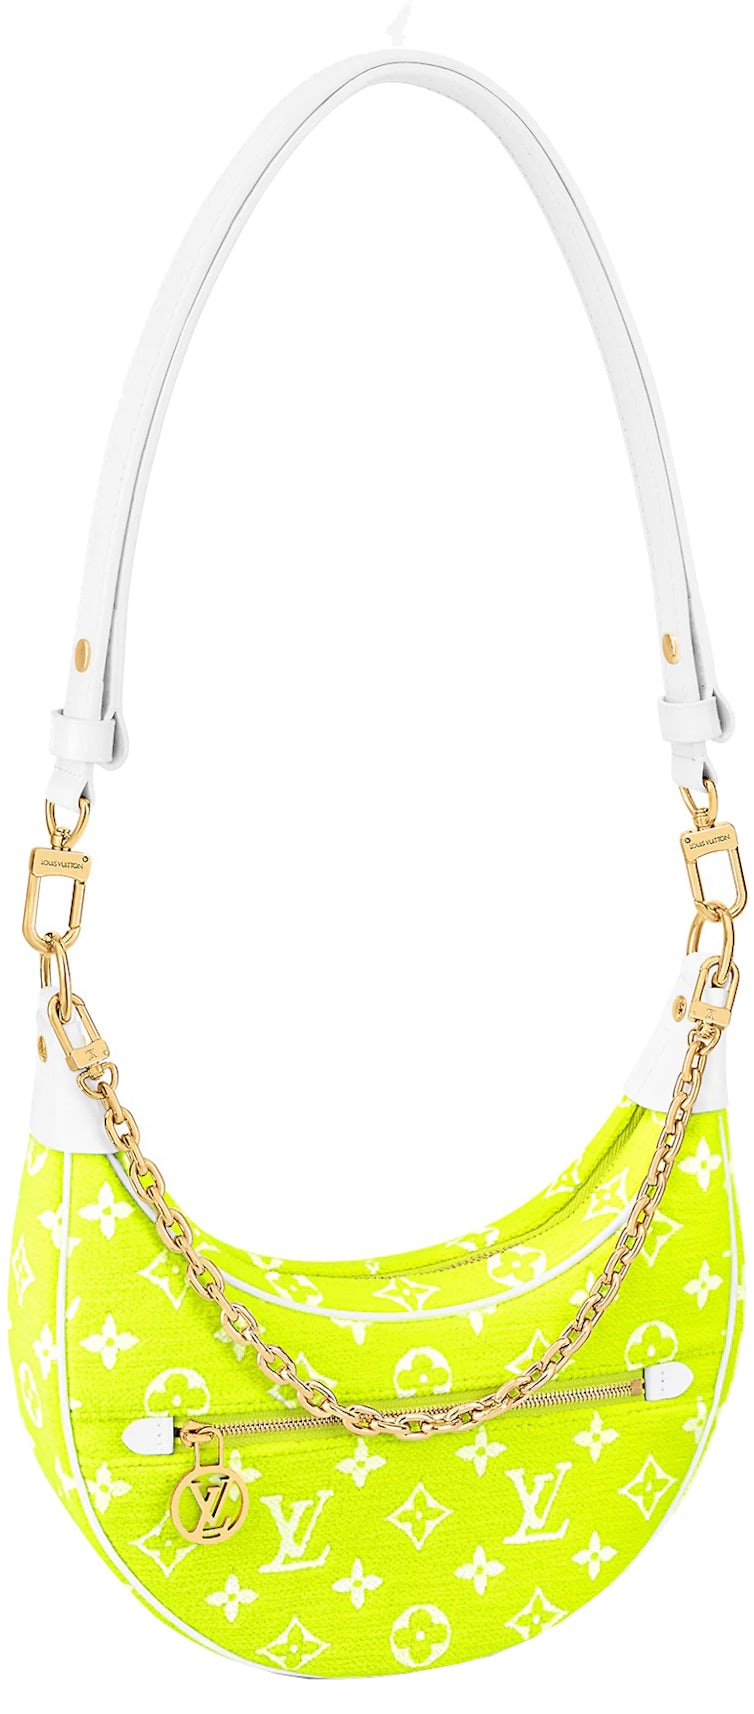 Louis Vuitton Loop Bag Bright Yellow in Calfskin Leather with Gold